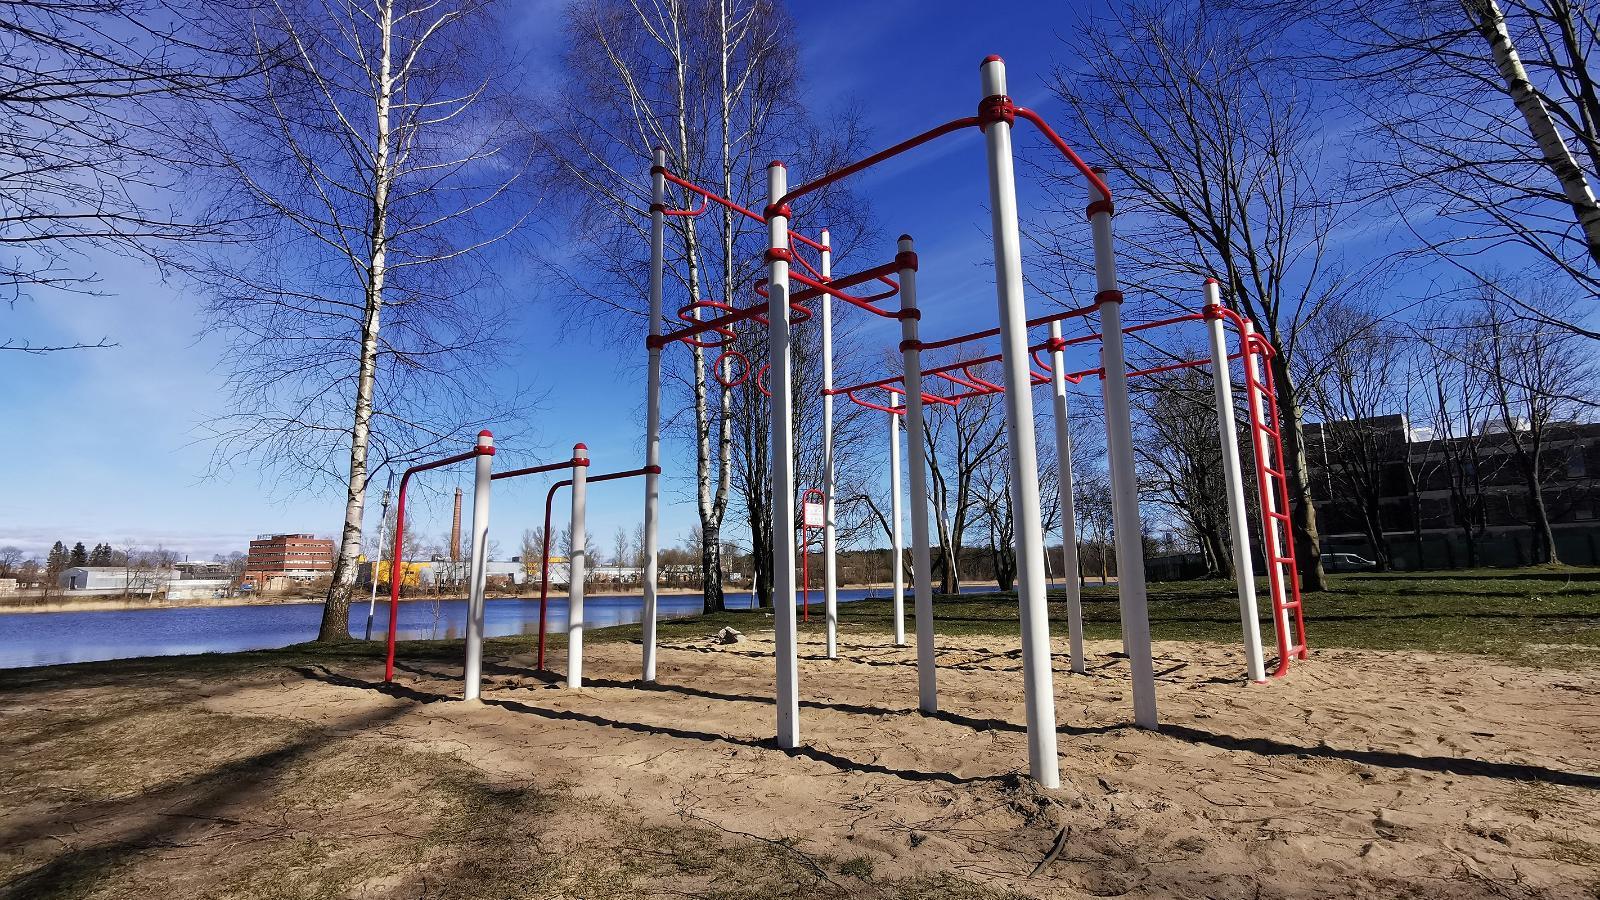 Jaanson’s Track outdoor gym